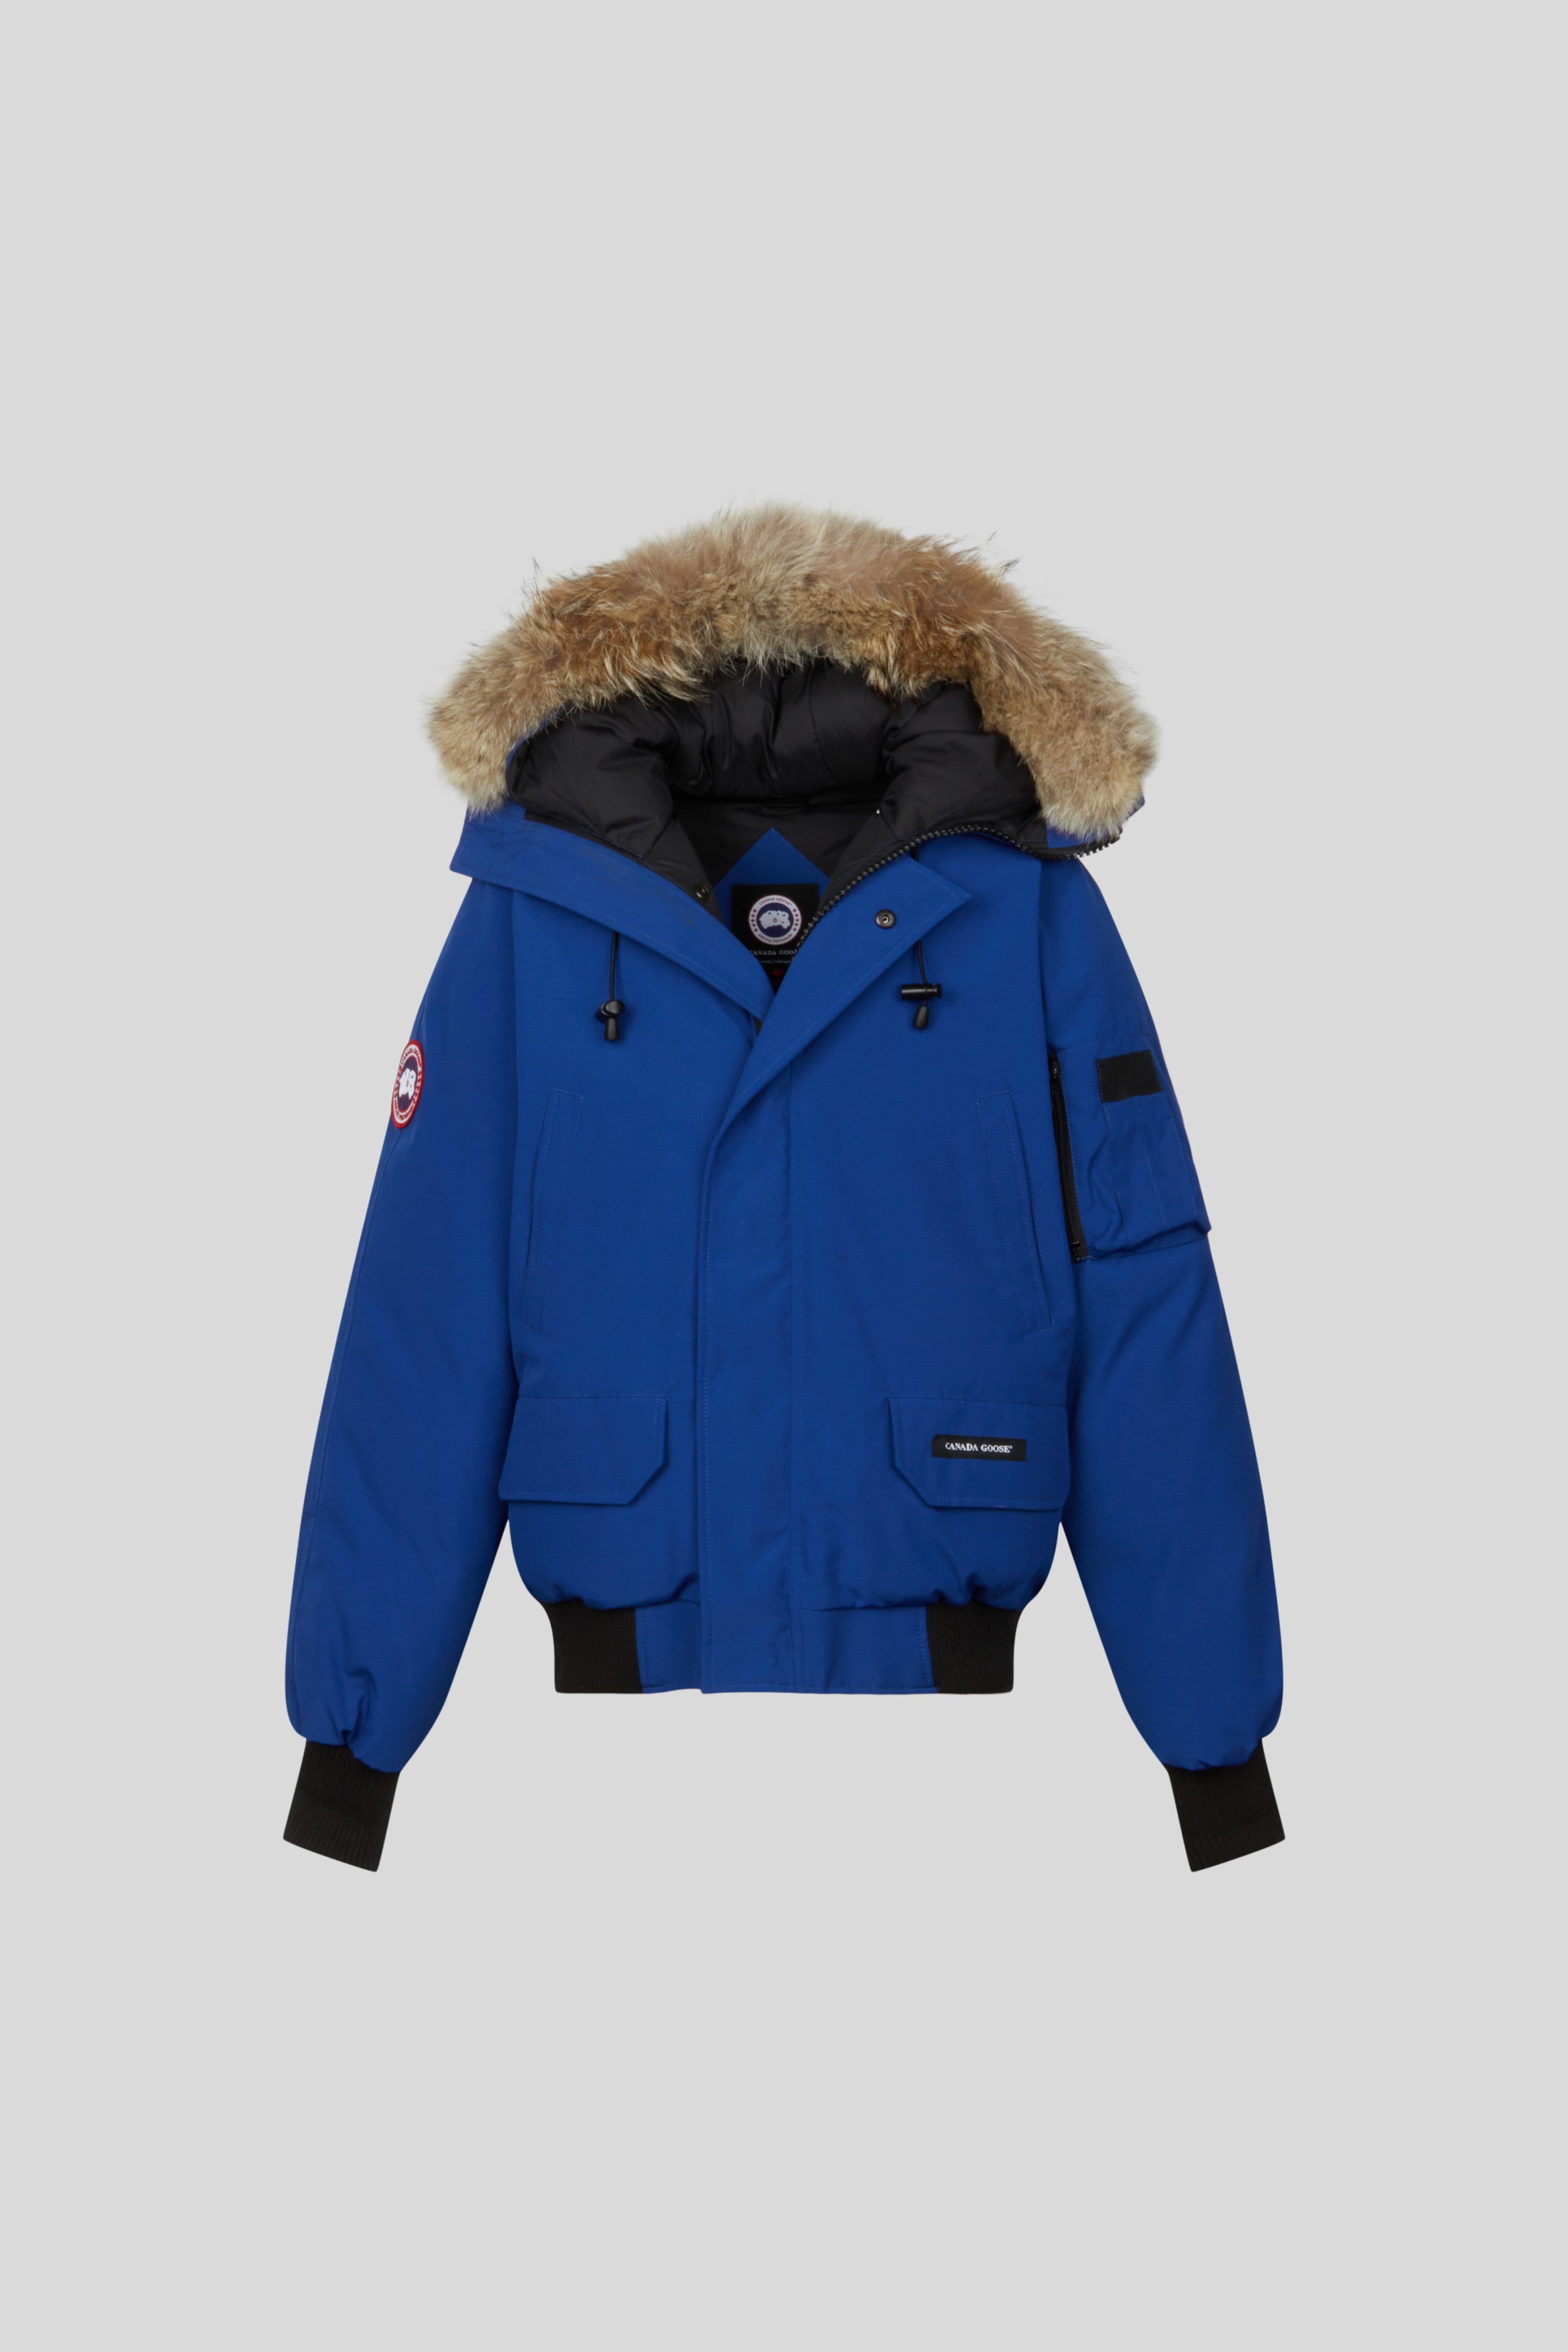 Used Men's Bombers for sale | Canada Goose Generations